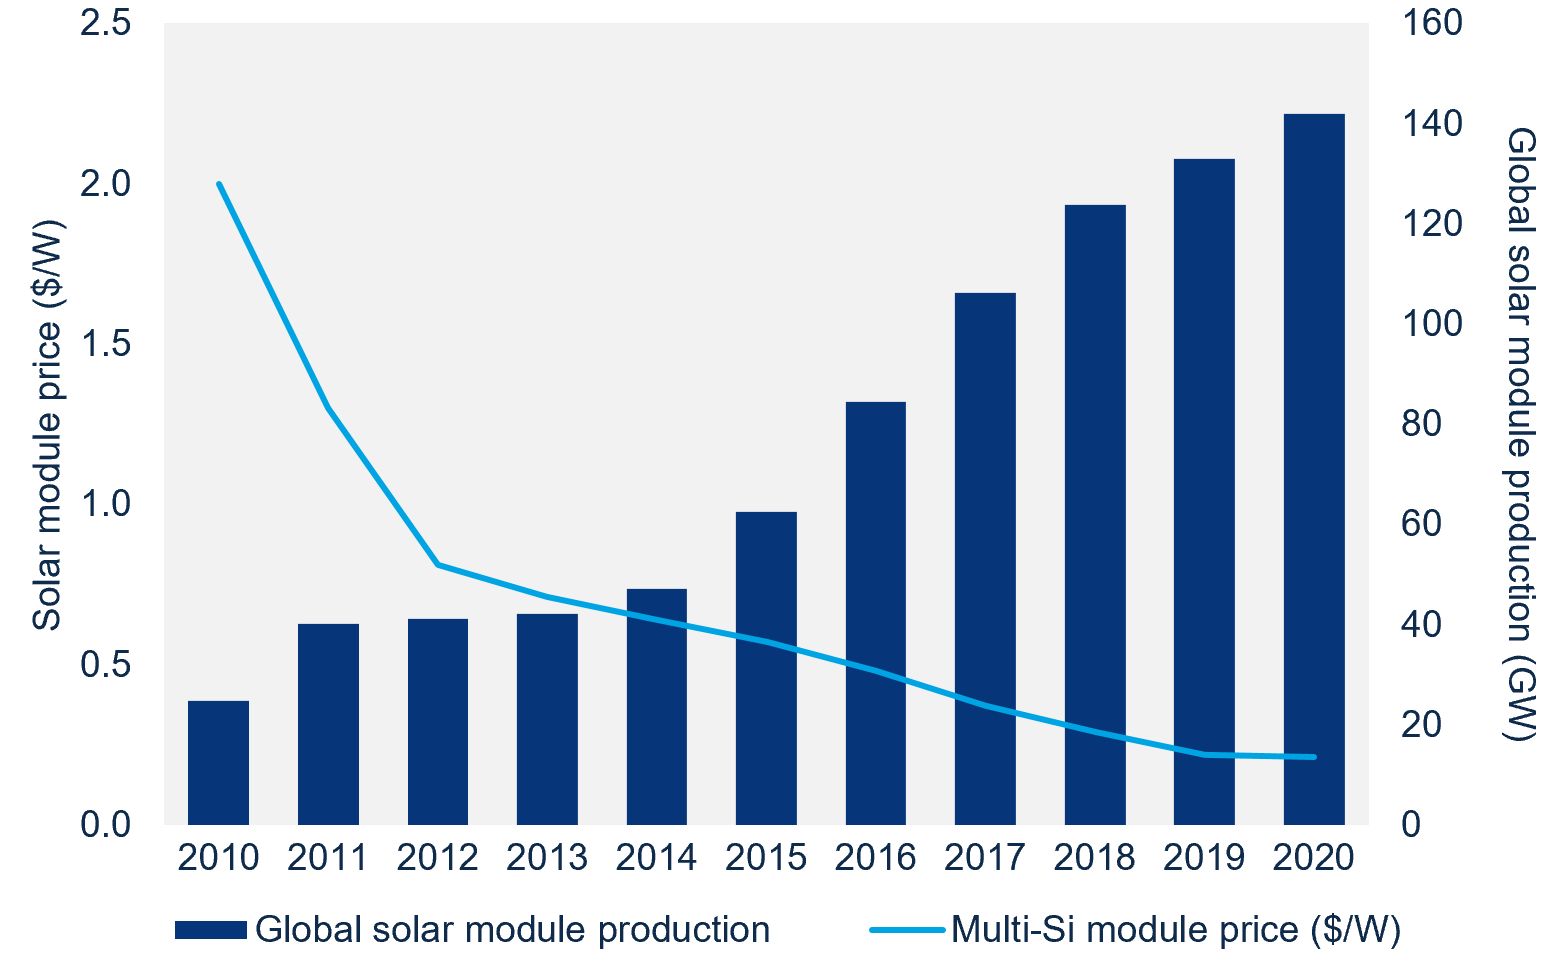 Chart showing multi-si module price decline as global solar production ramps up to 140 GW by 2020